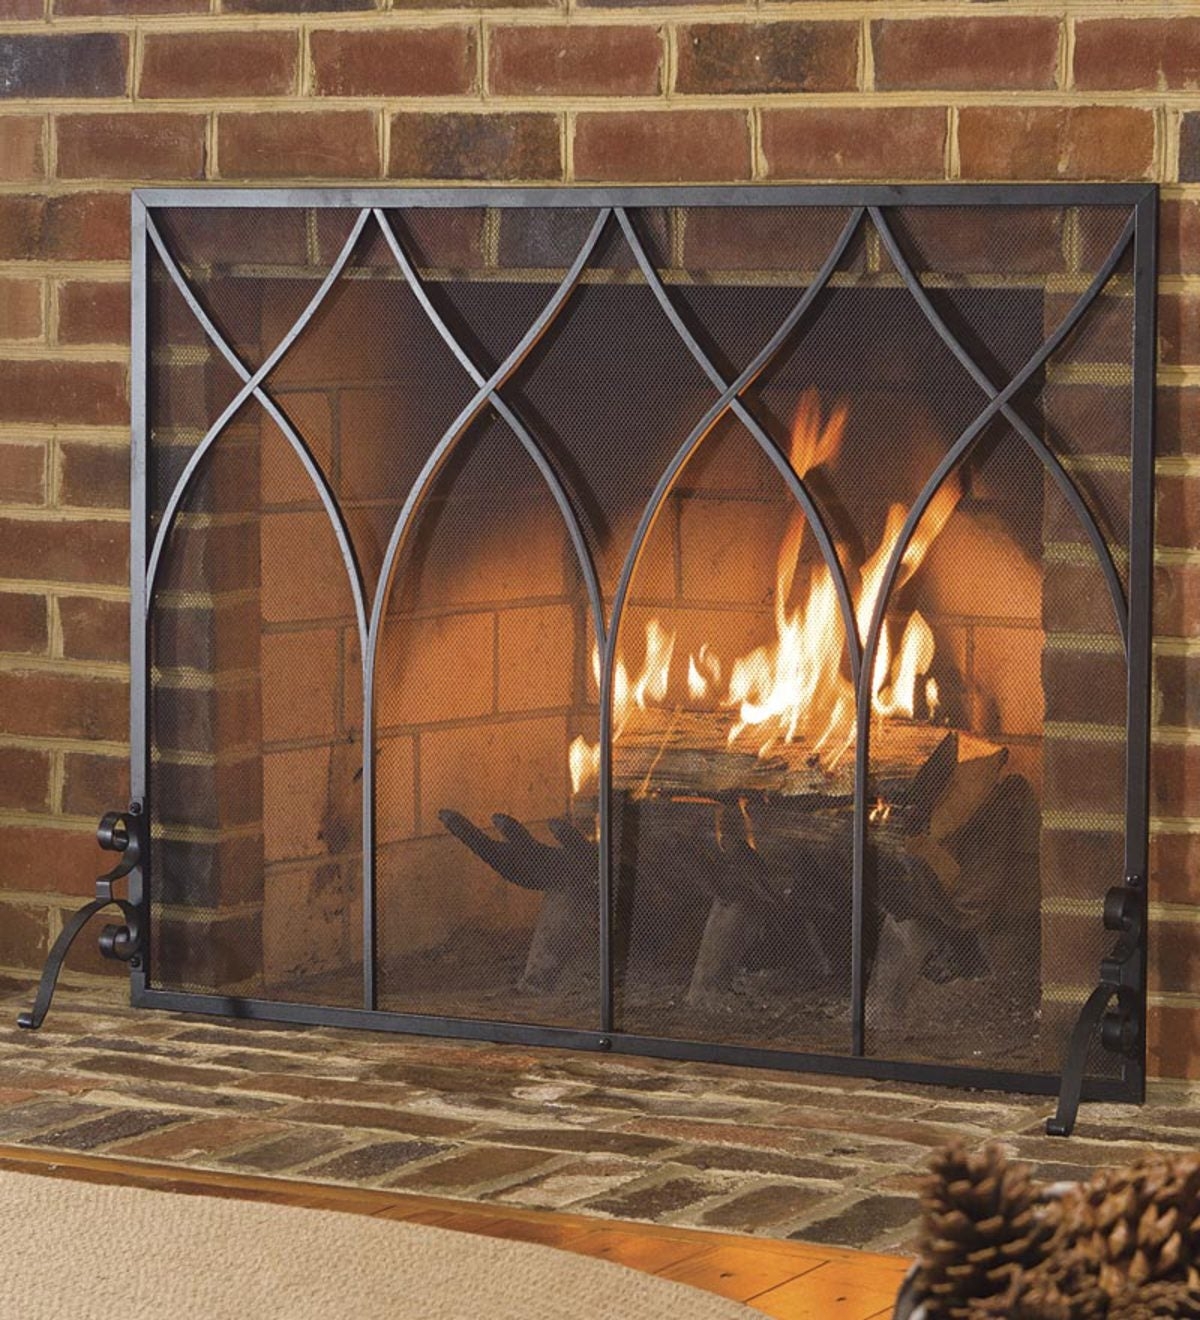 New sale flat panel hourglass steel fire place screen 38